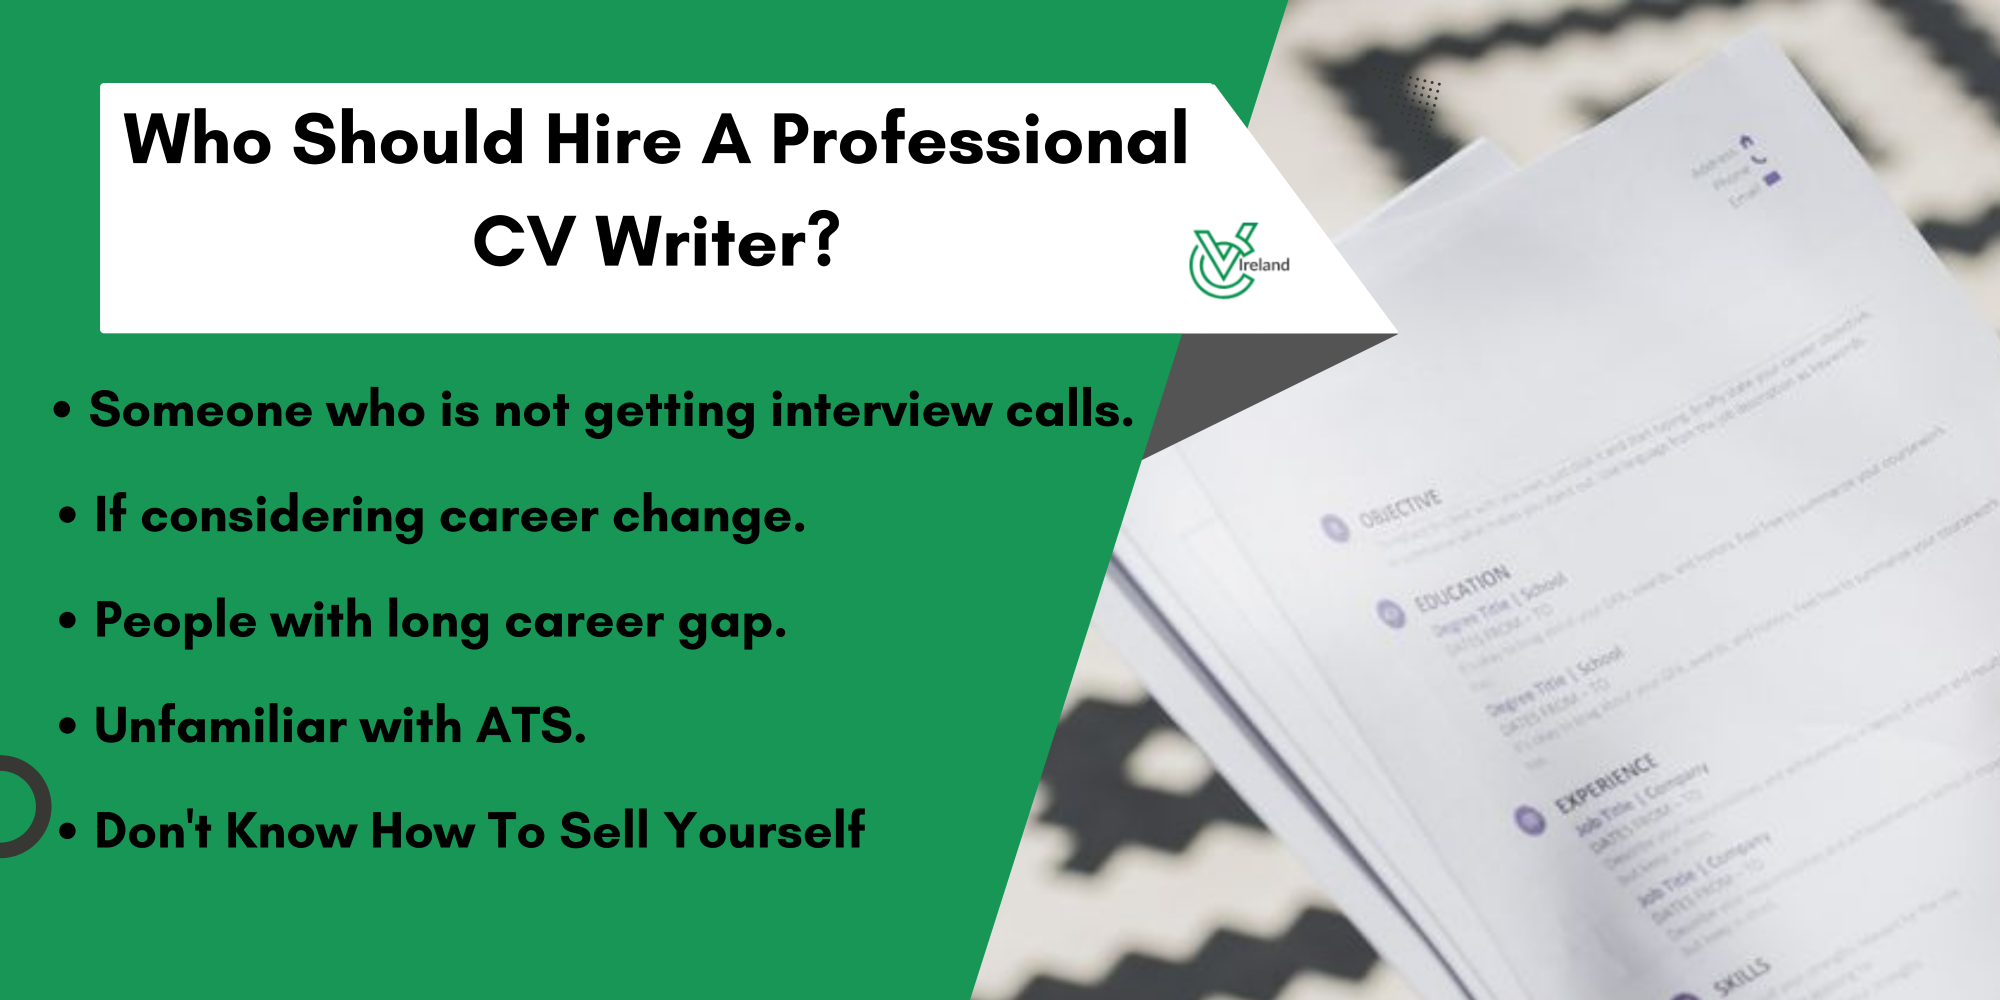 who should hire a professional cv writer in ireland